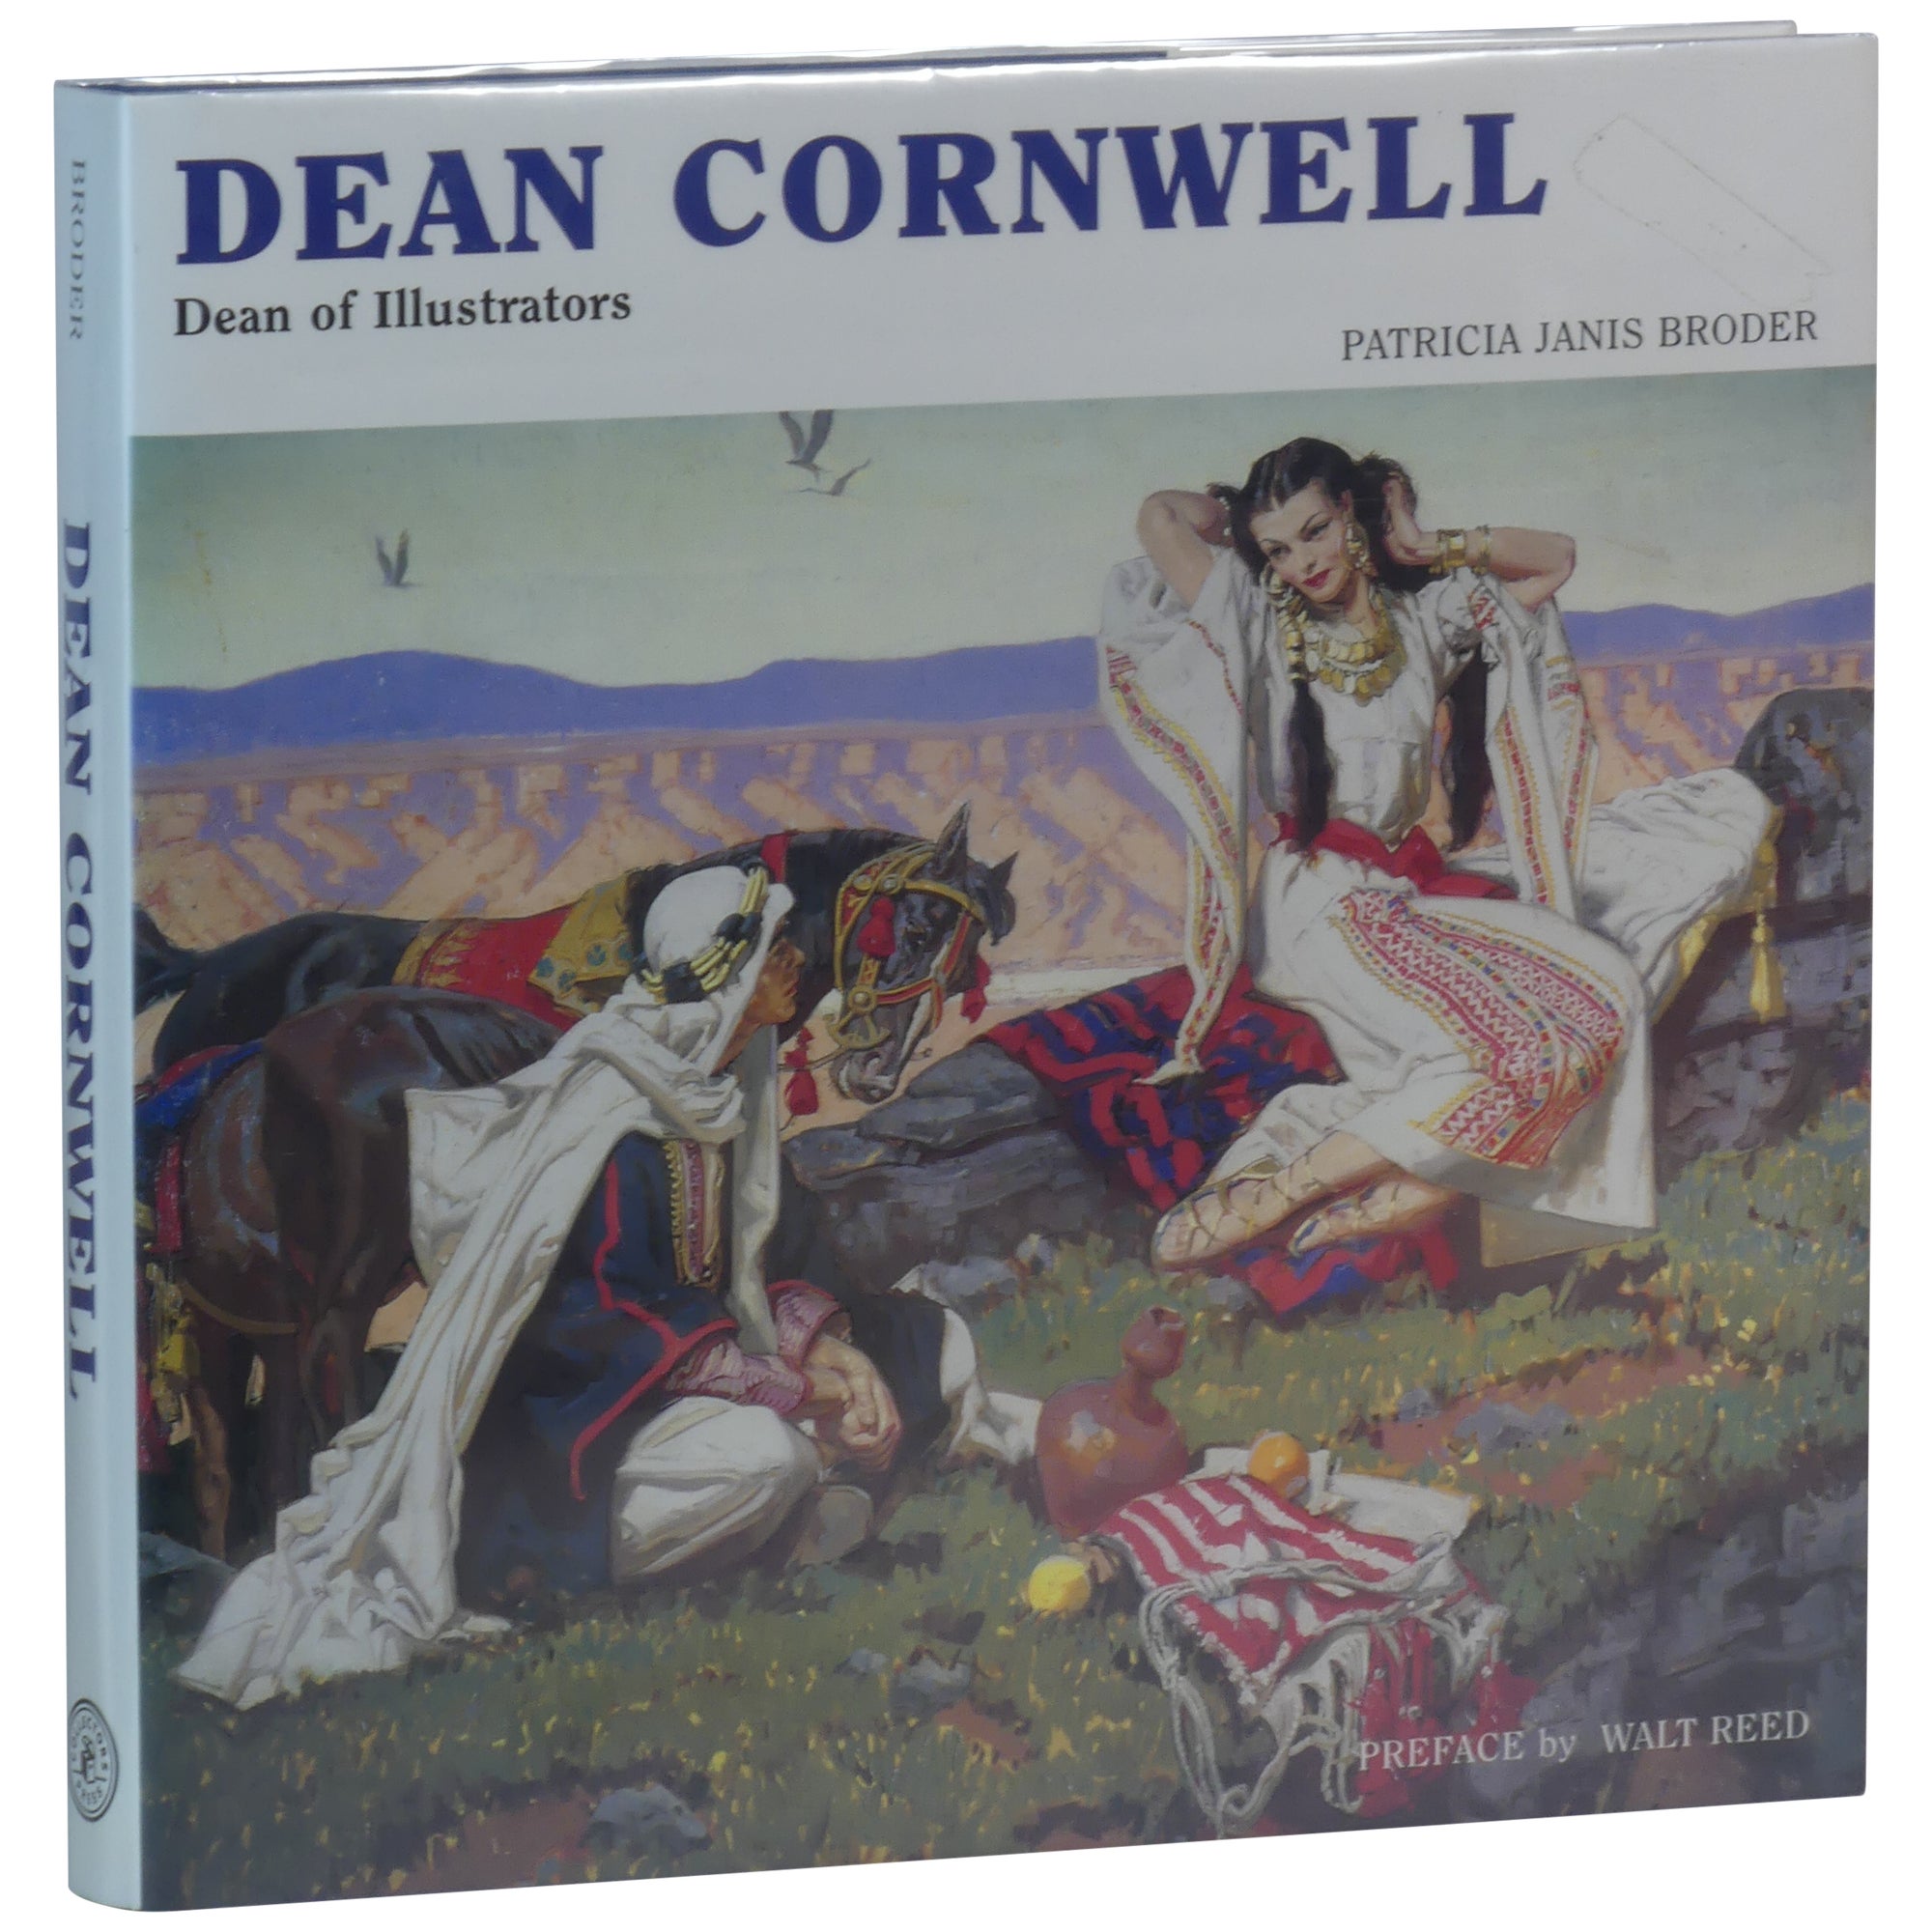 Dean Cornwell: Dean of Illustrator by Patricia Janis Broder on Downtown  Brown Books